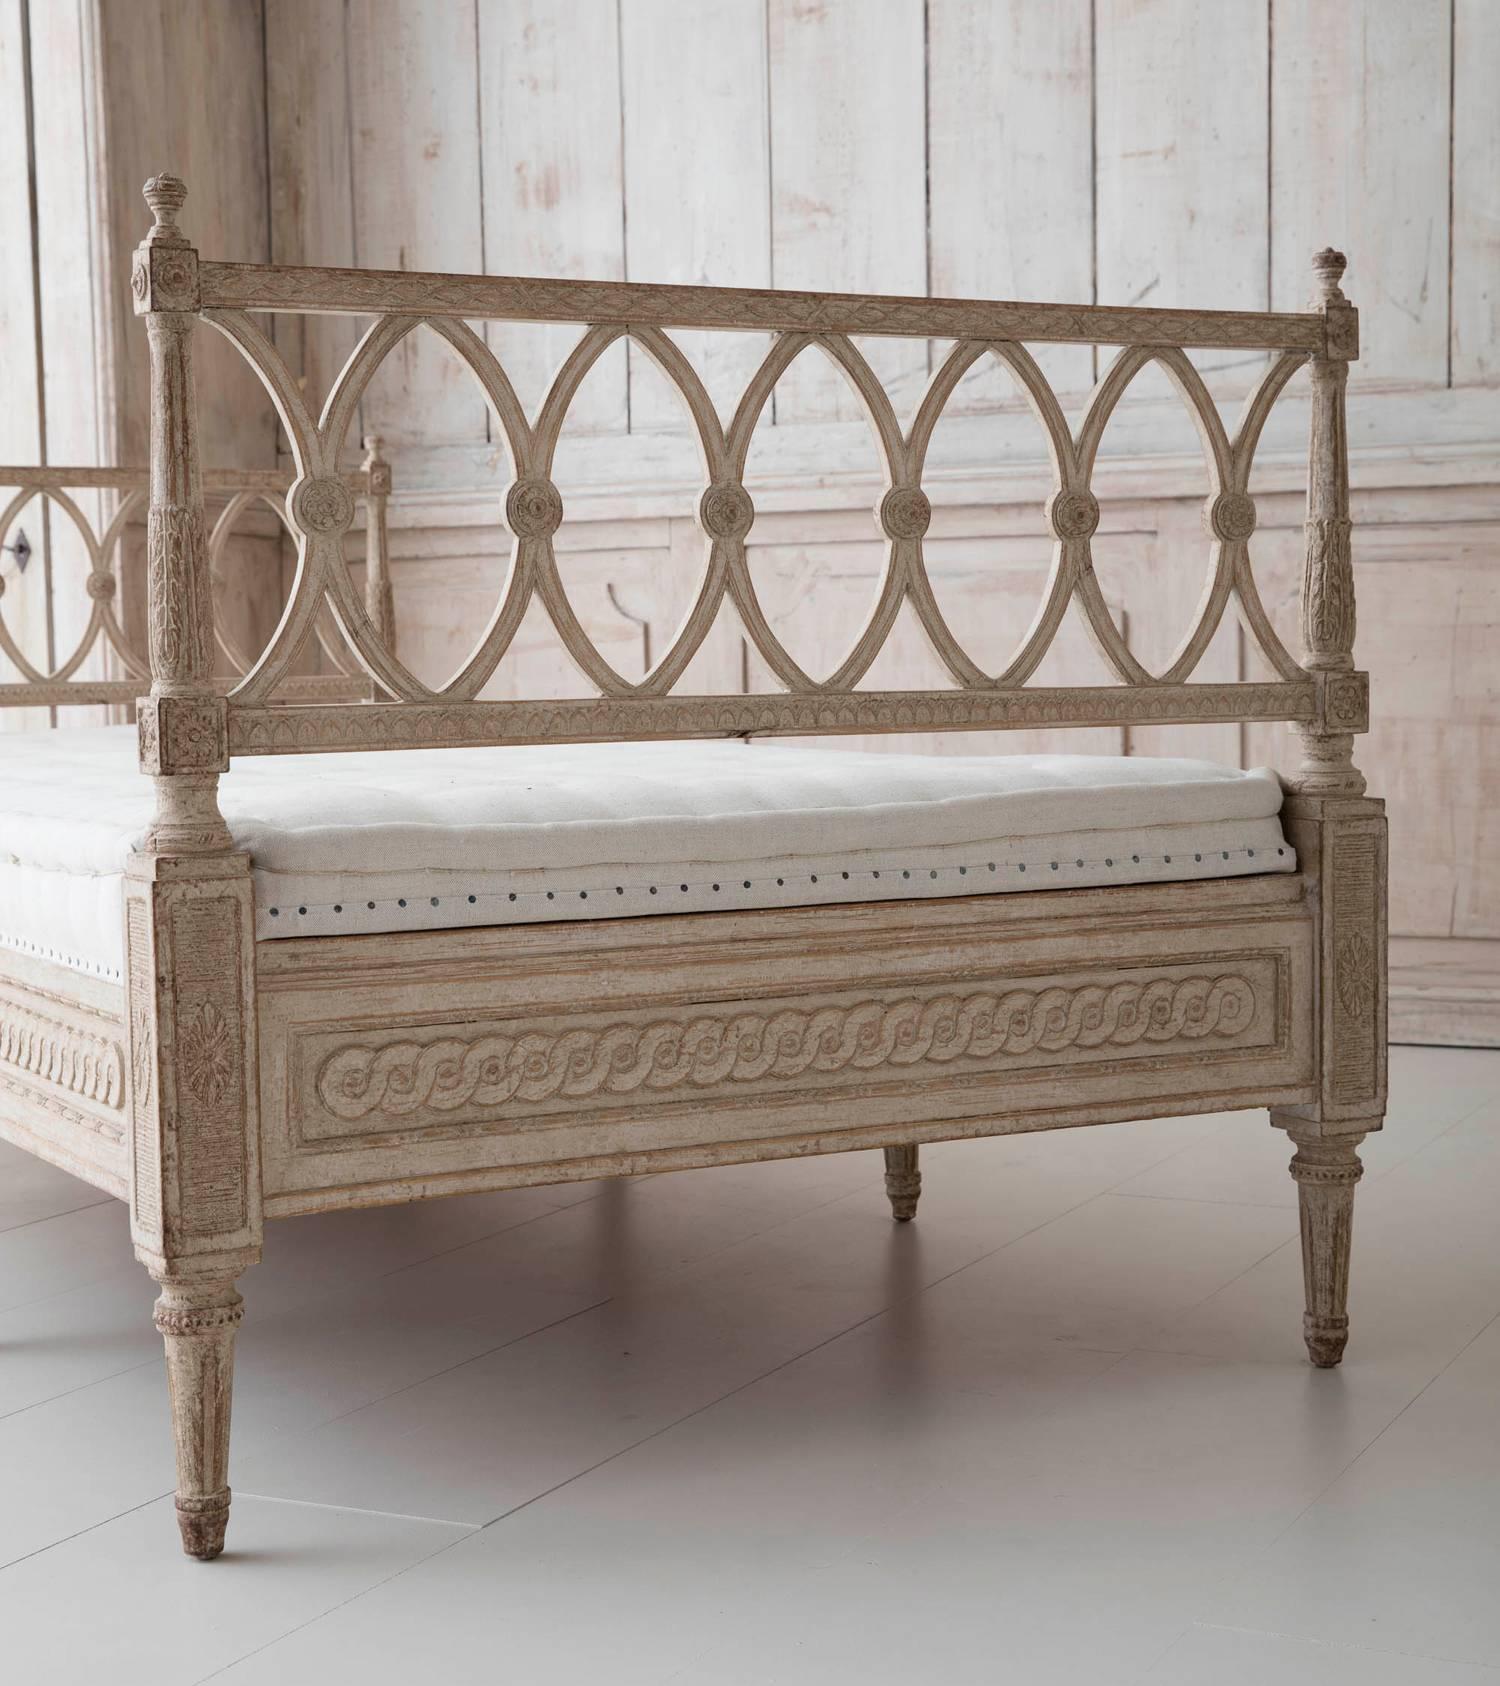 20th Century Swedish Daybed Sofa in the Gustavian Style